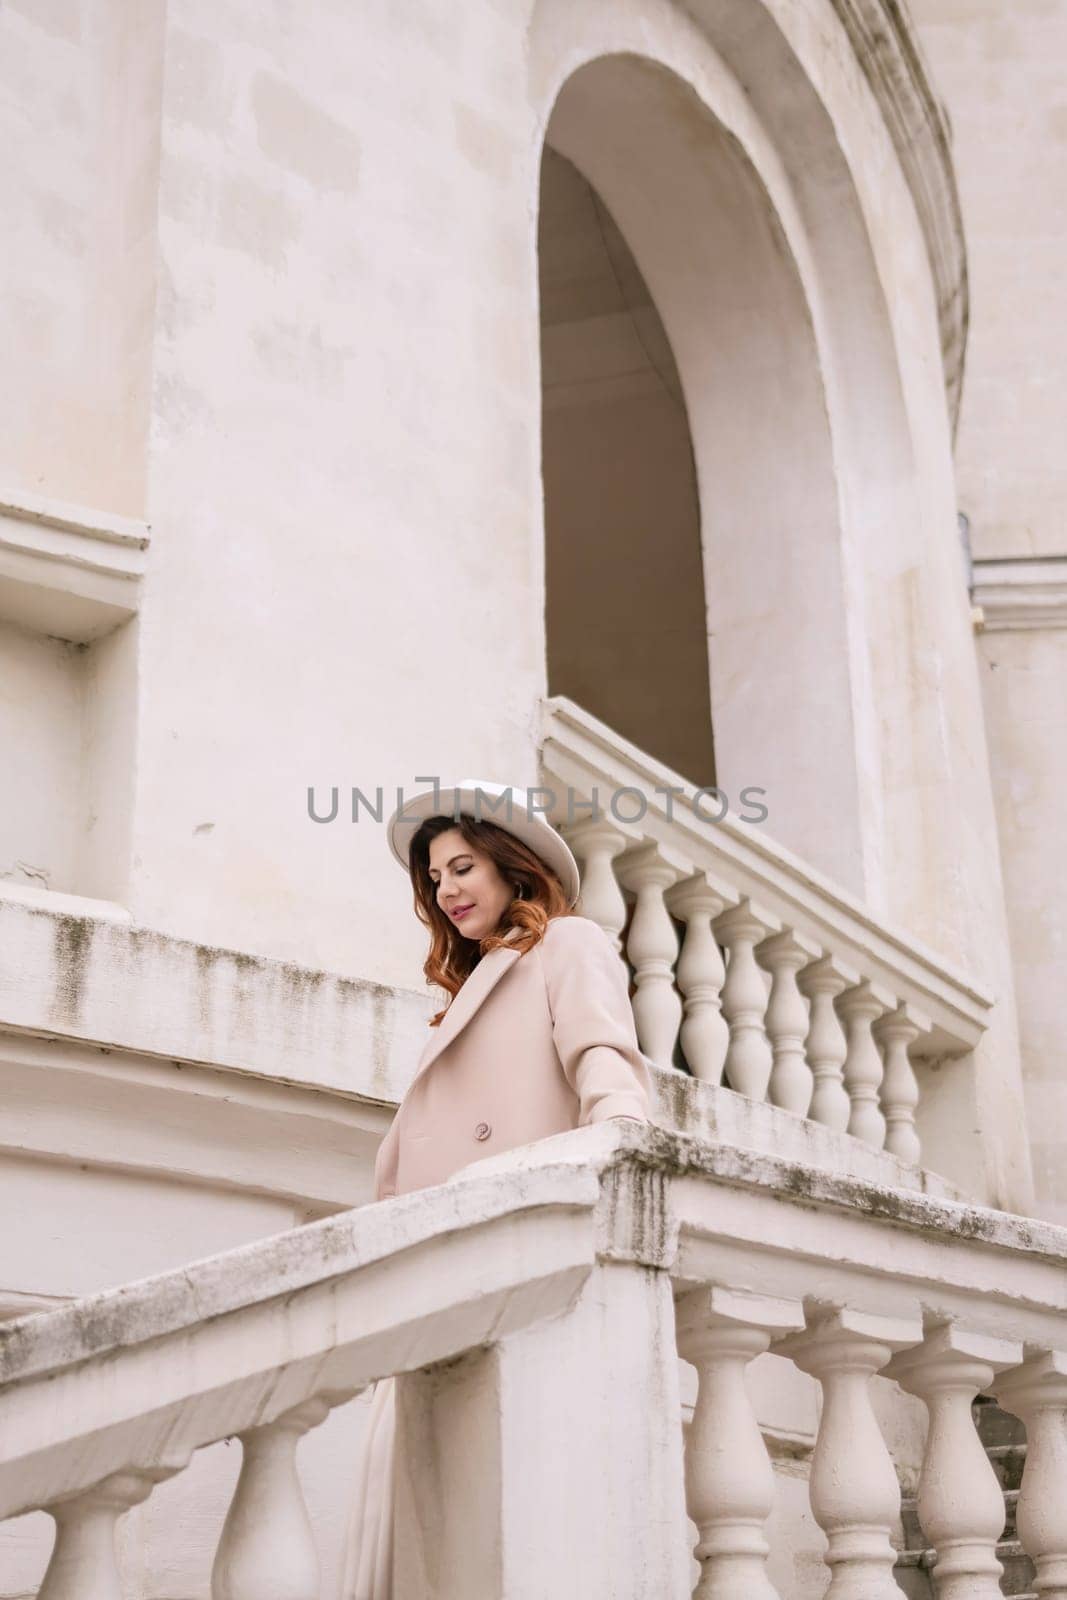 woman in elegant coat and hat against an intricate architectural backdrop, harmoniously blending modern fashion with historical allure. The soft daylight adds to its timeless appeal. by Matiunina